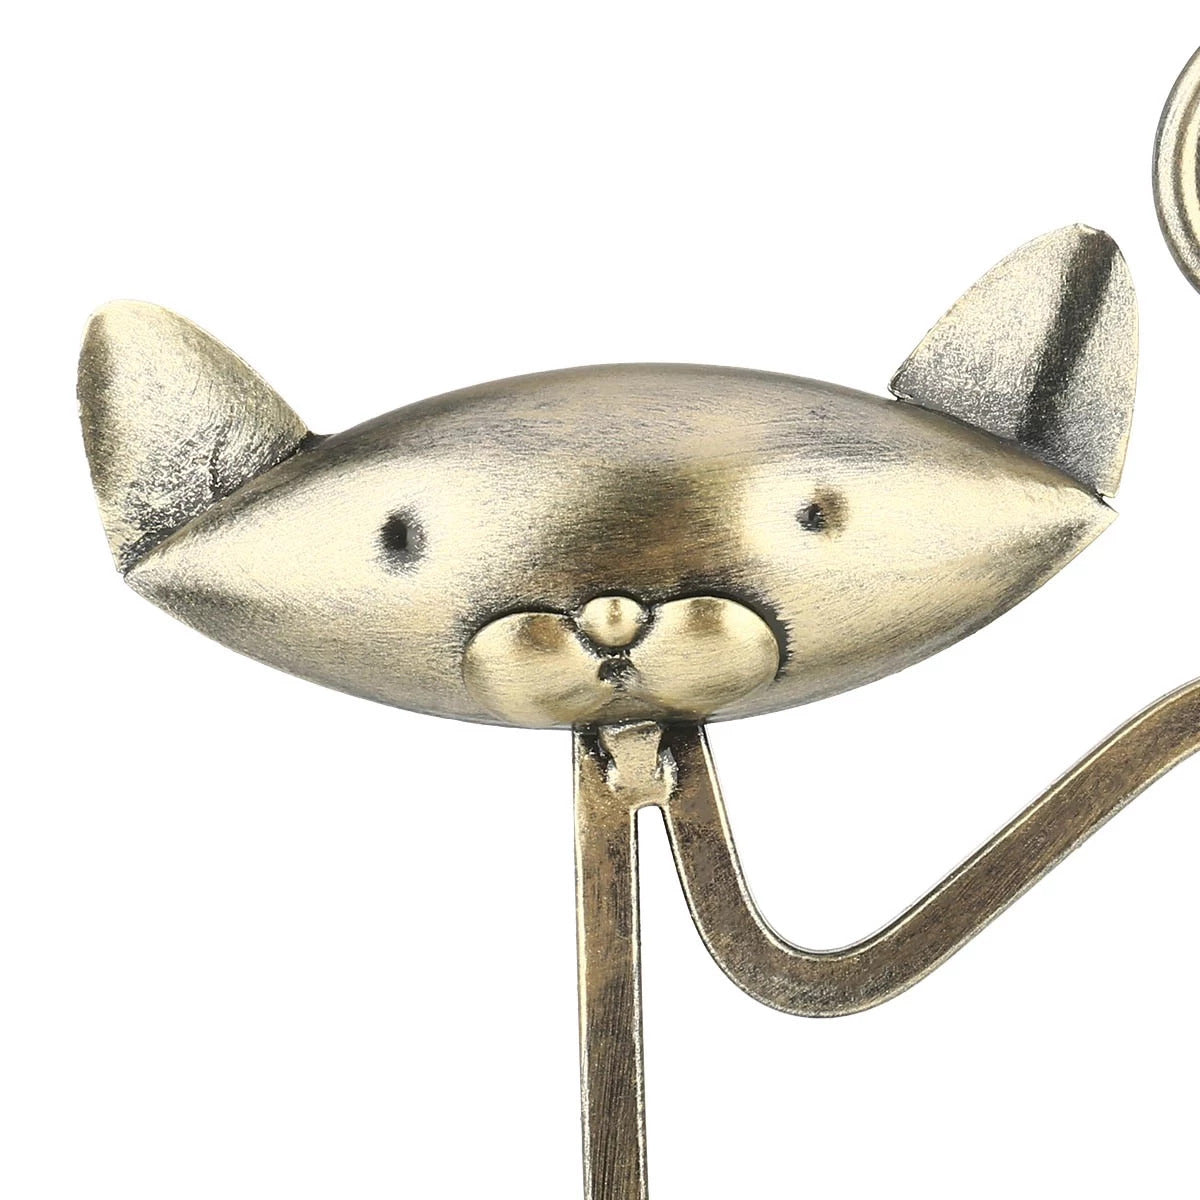 Gifts For Cat Lovers as Ornaments